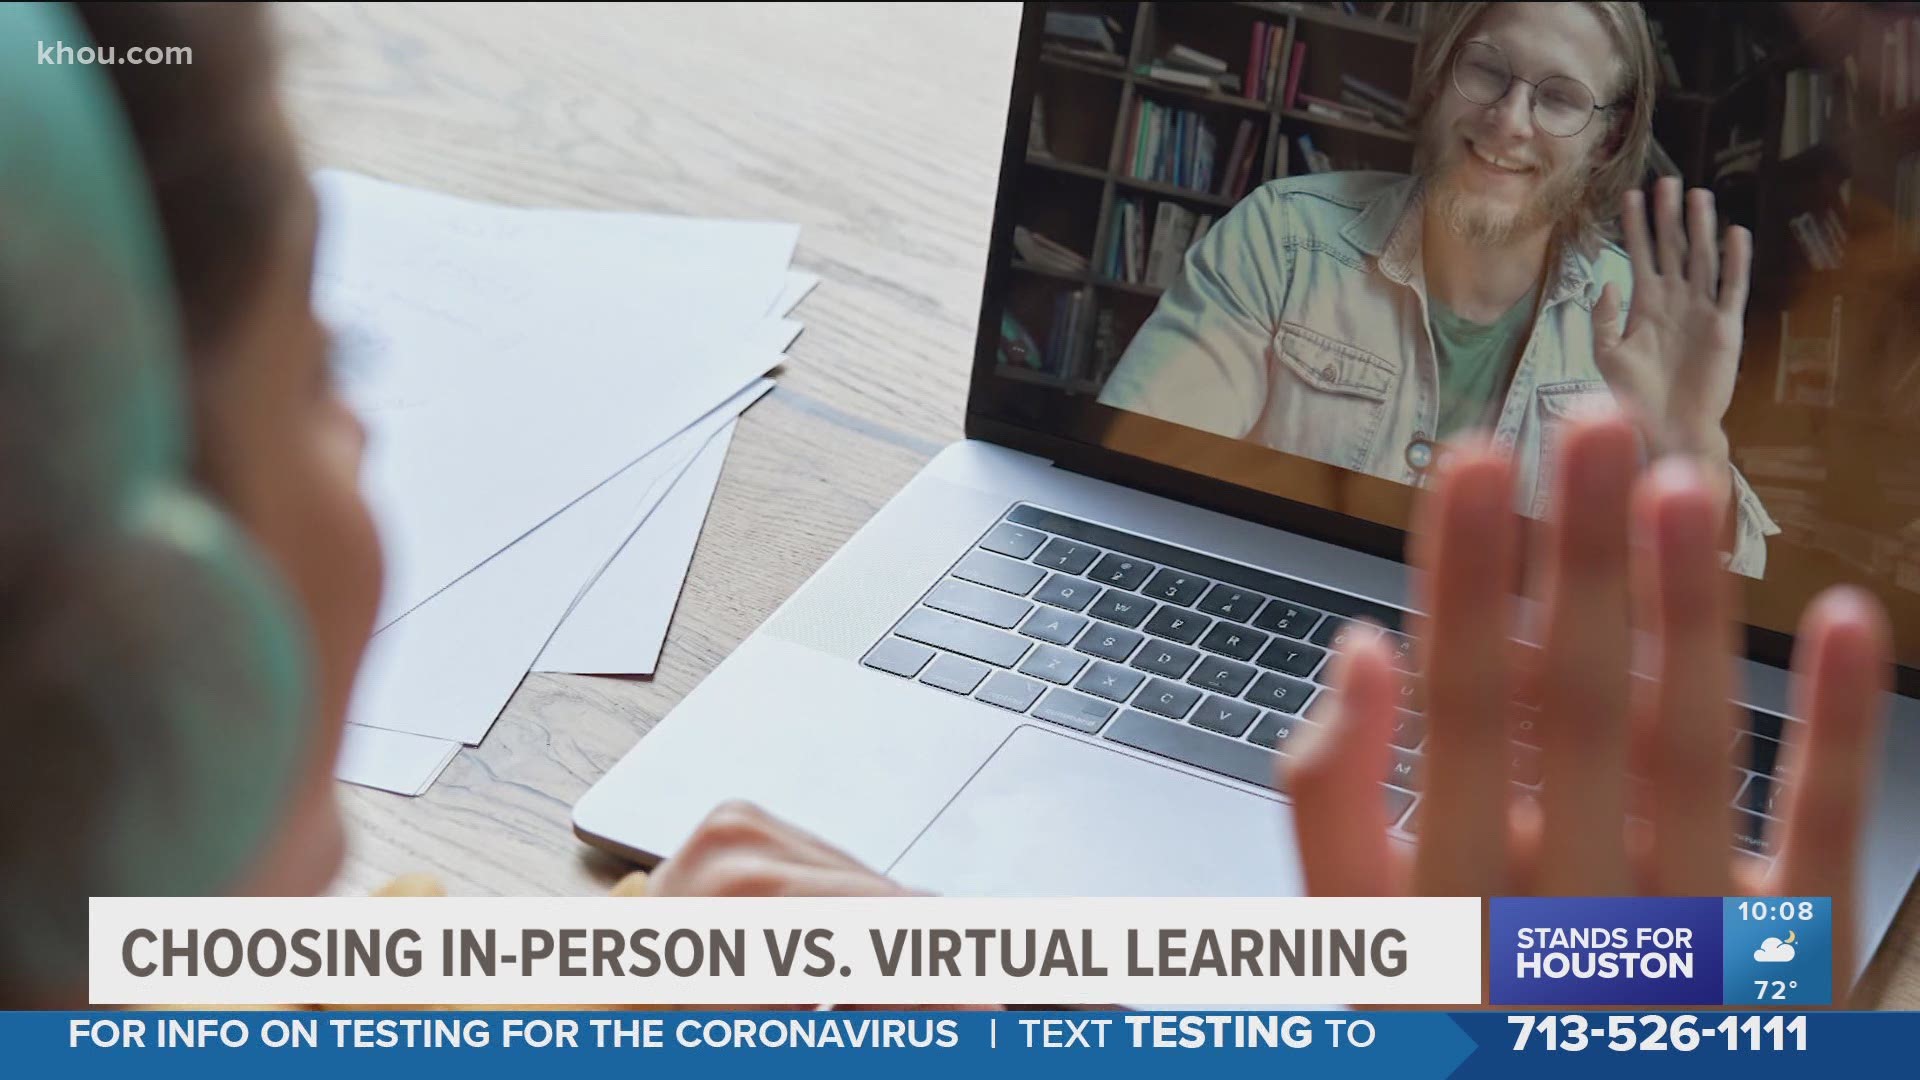 Our analysis shows low-income families are more likely to choose virtual learning for their children rather than to send them to campus this year.